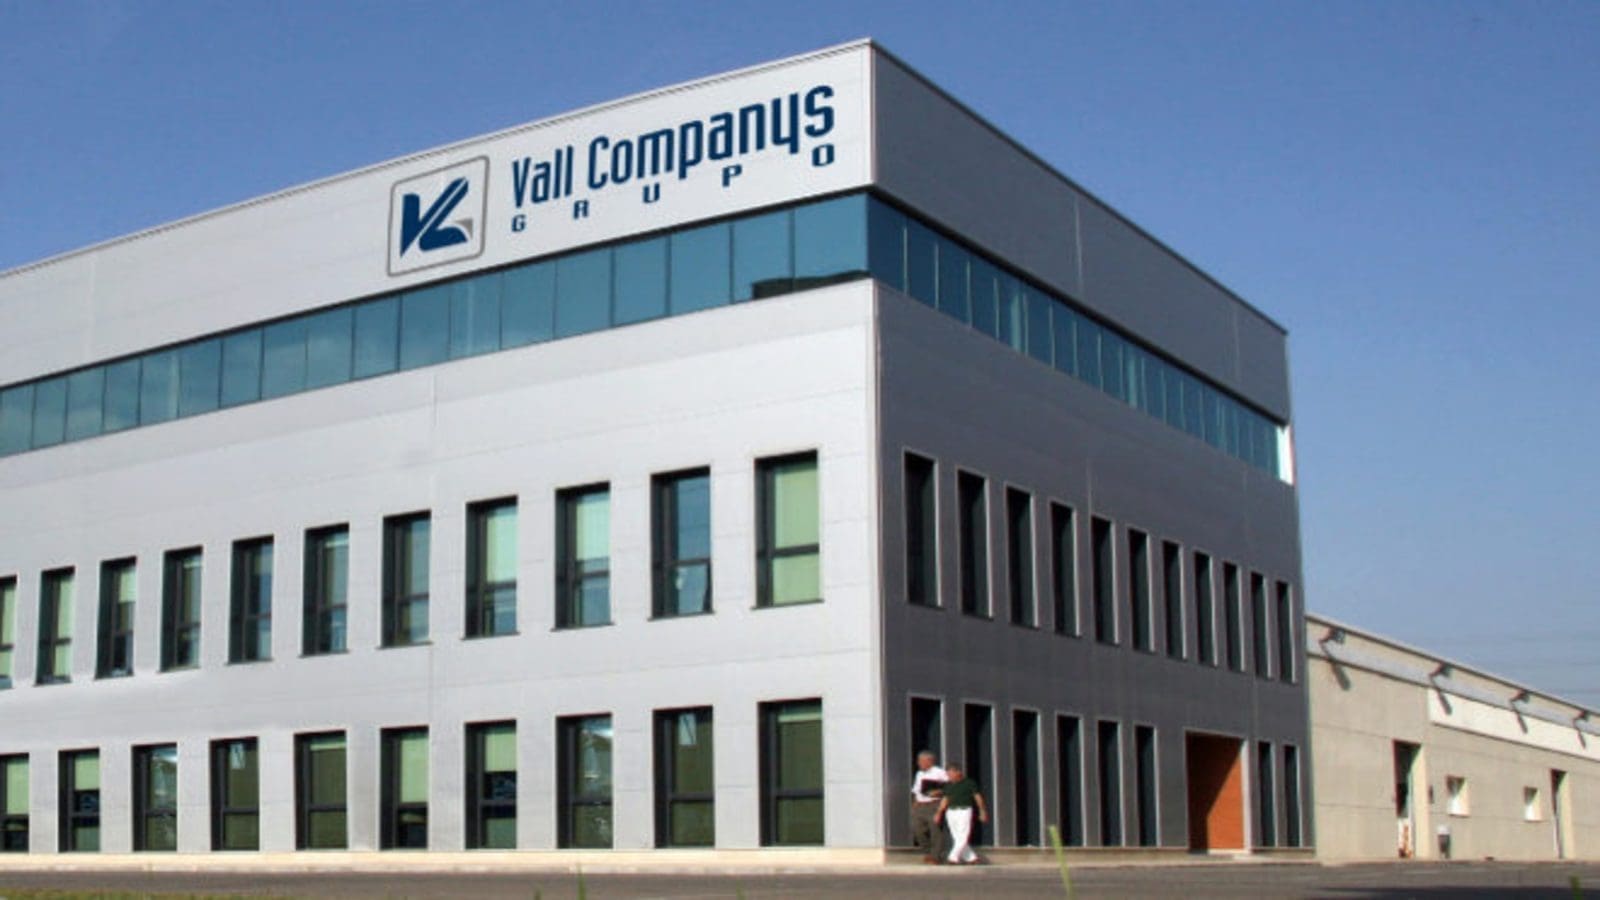 Spanish poultry giant Grupo Vall Companys goes for majority shares in Grupo Sada